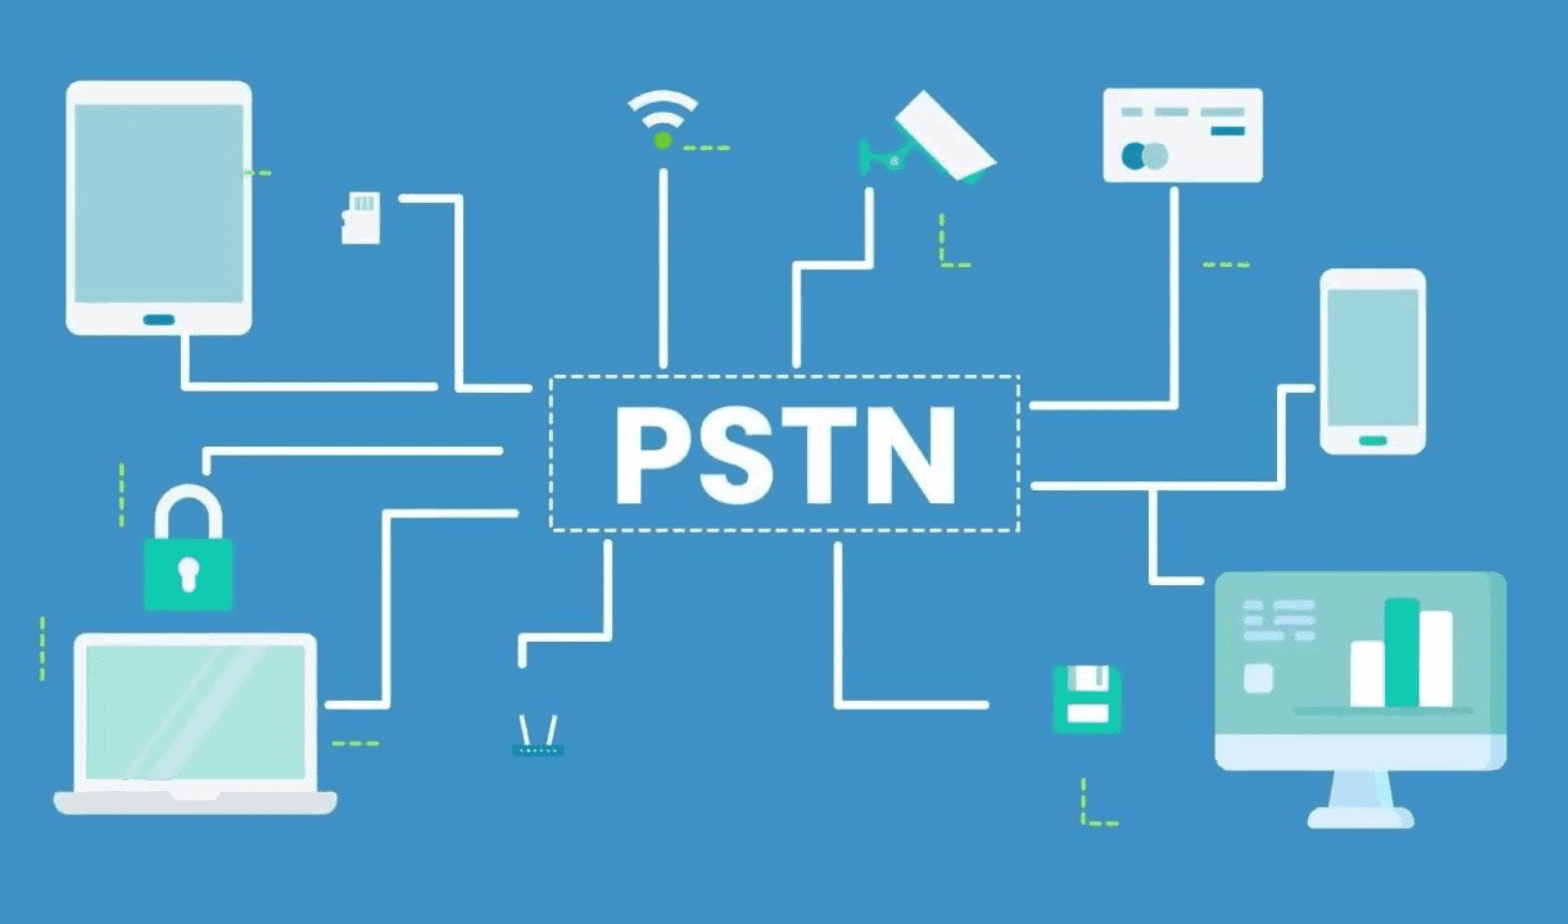 Trustack MSP Cyber Security, IT Services, IT Support. A digital illustration depicting a PSTN concept. Various devices, including a tablet, smartphone, computer, and security camera, are connected to a central PSTN label, representing an intricate network communication system. The design subtly hints at the transition from ISDN to modern networking technologies.